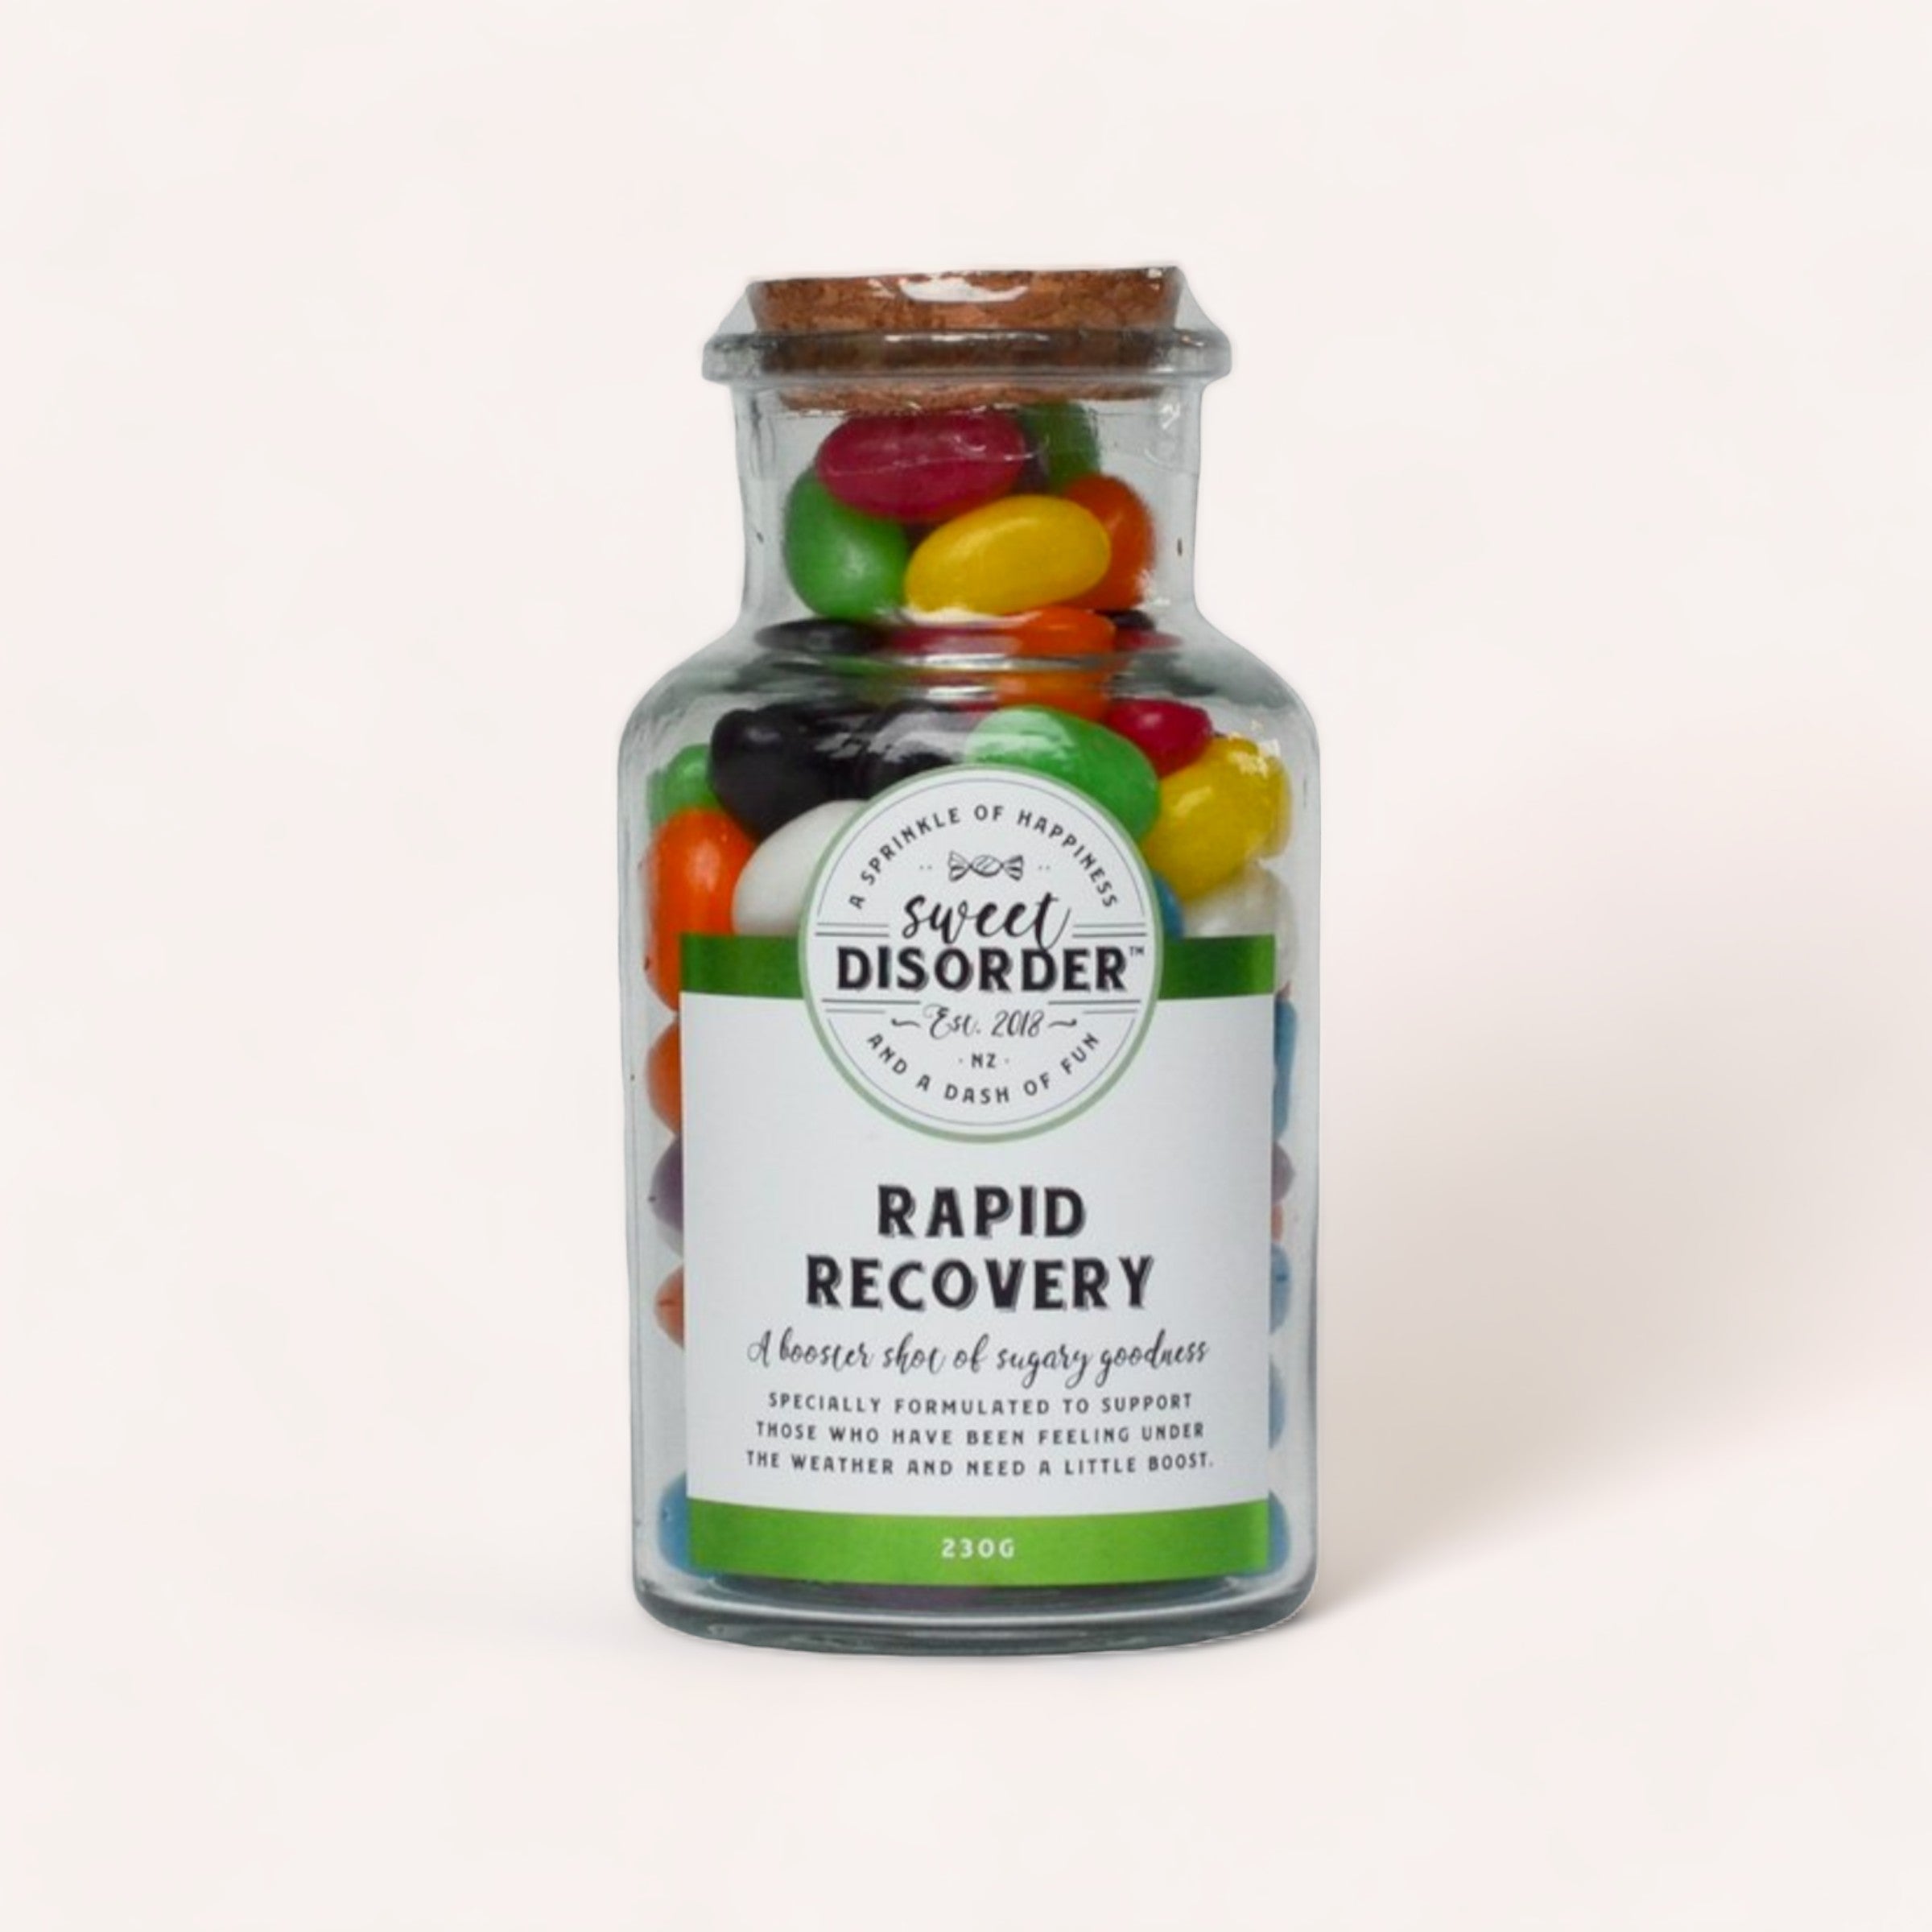 A bottle of assorted colorful jelly beans from New Zealand labeled "Rapid Recovery Lollies" by Sweet Disorder as a playful remedy for when you're feeling under the weather.